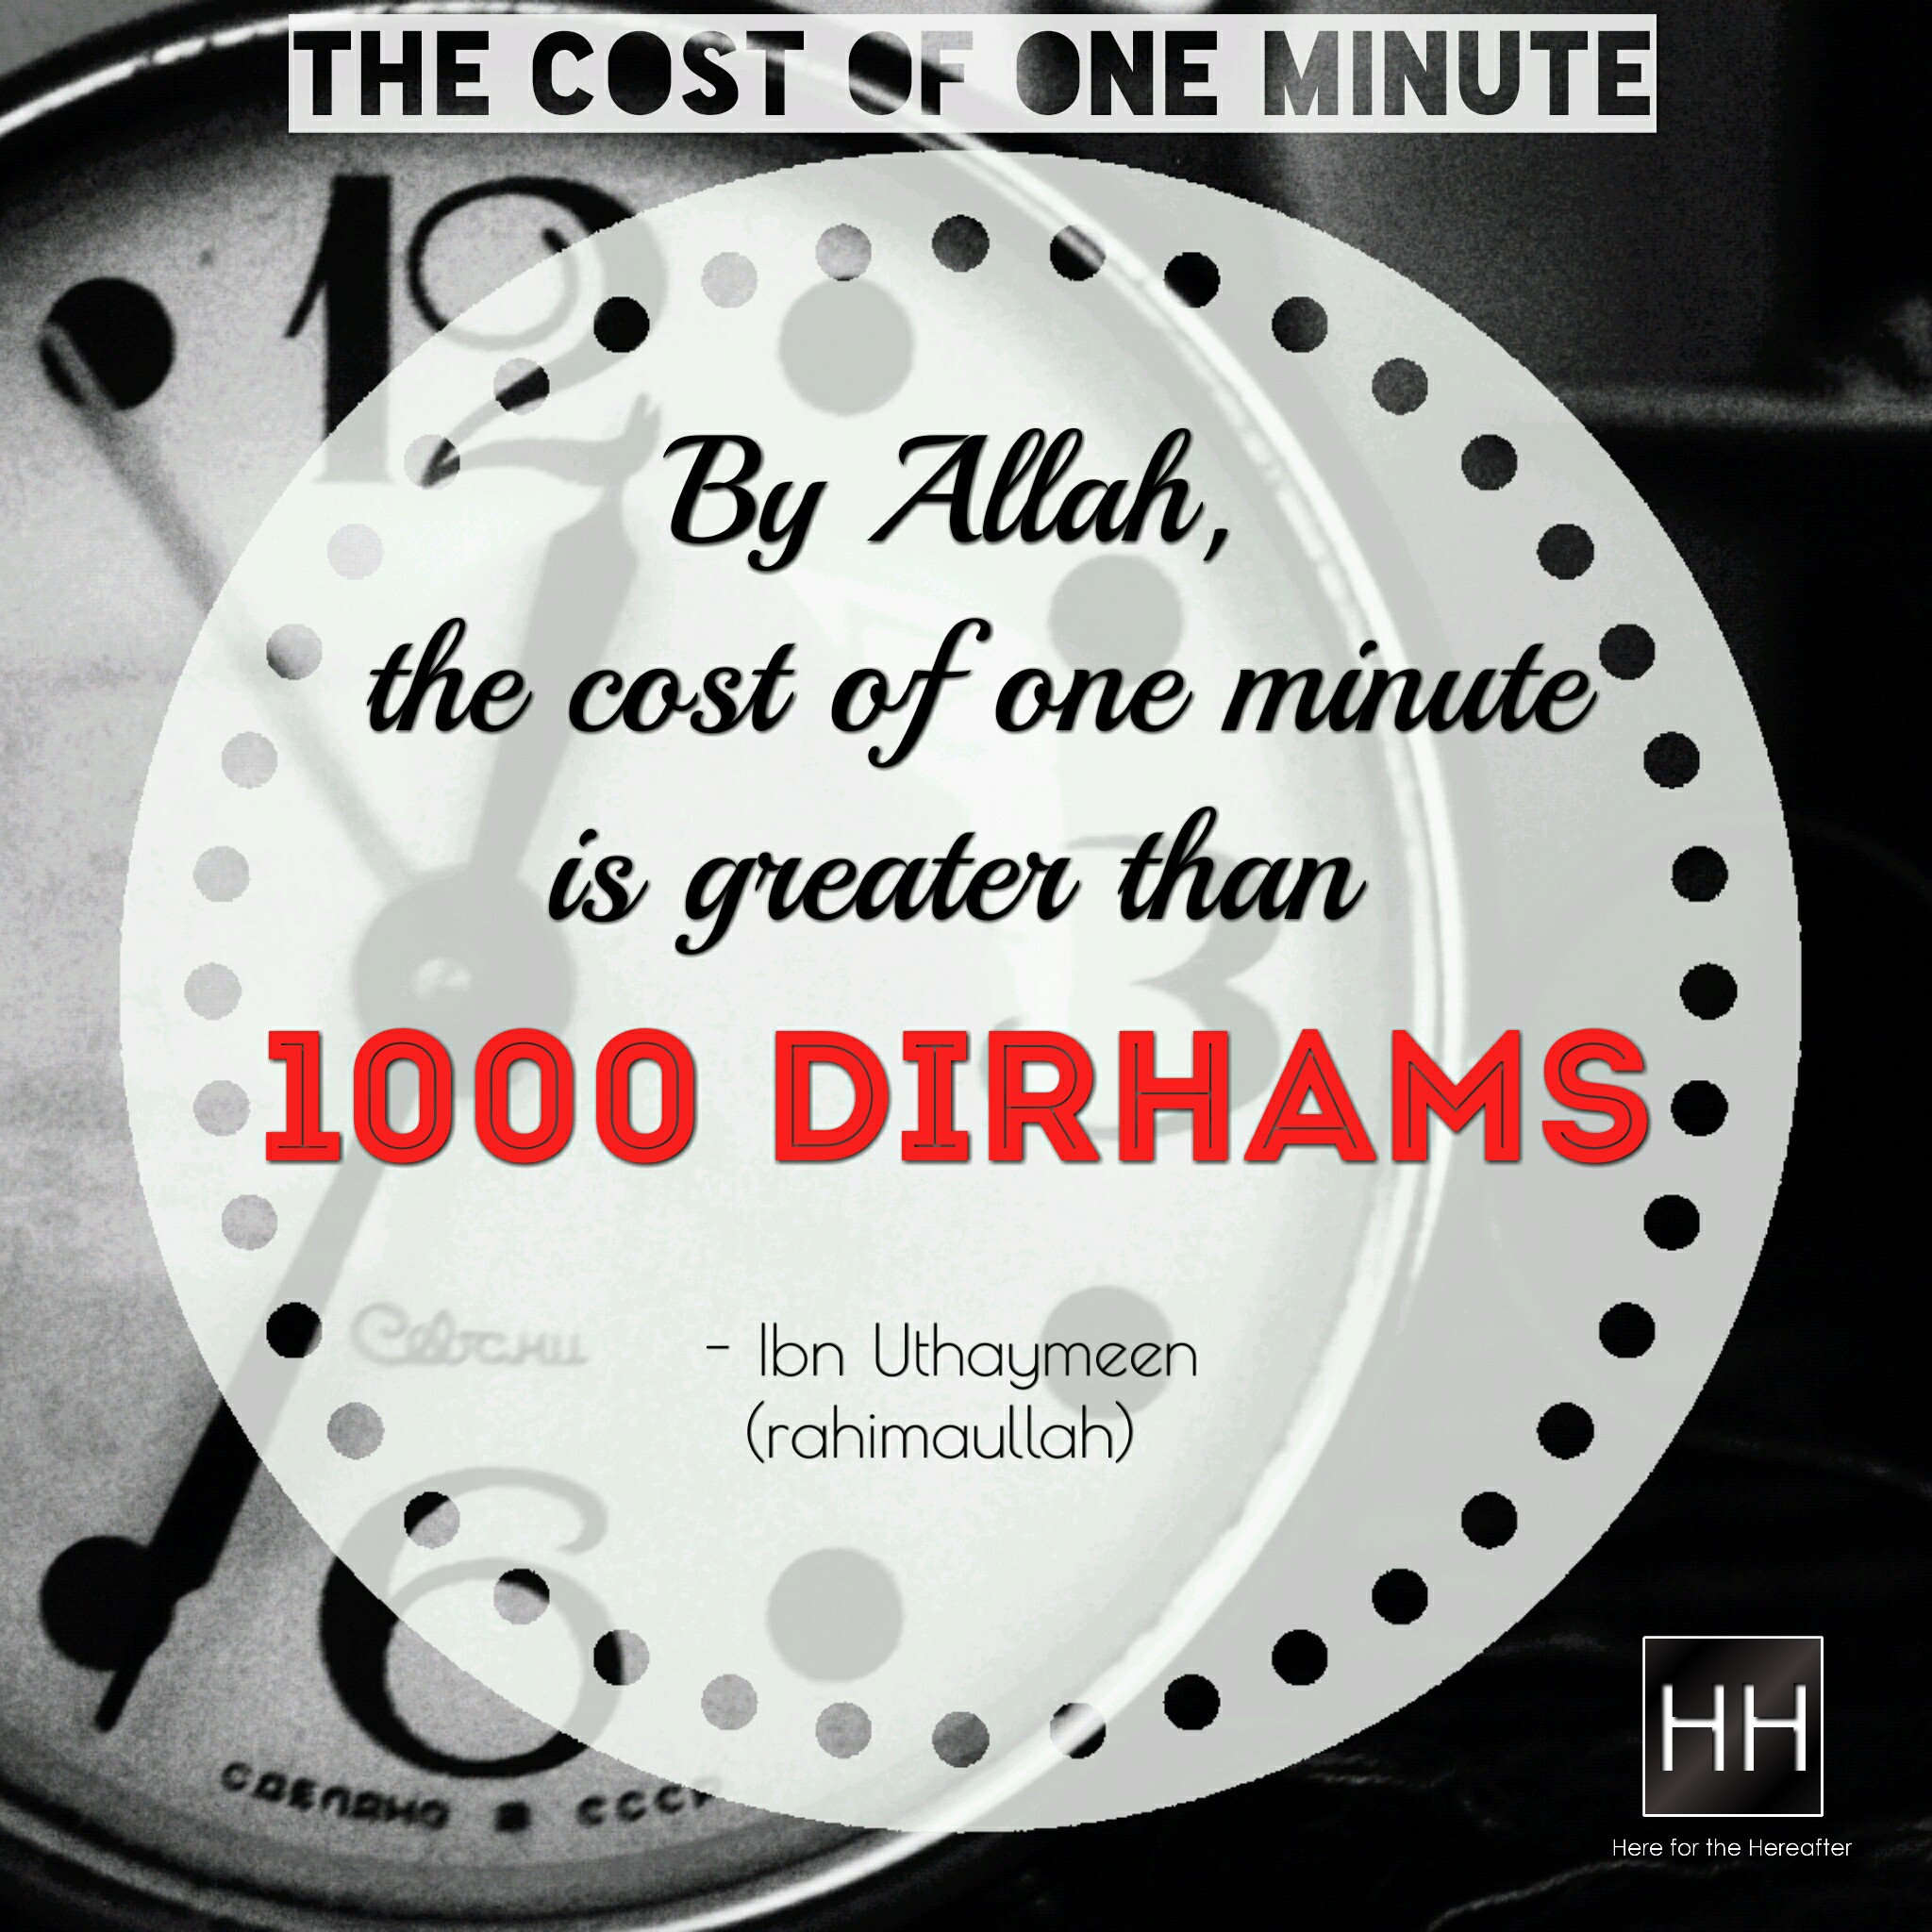 The cost of one minute